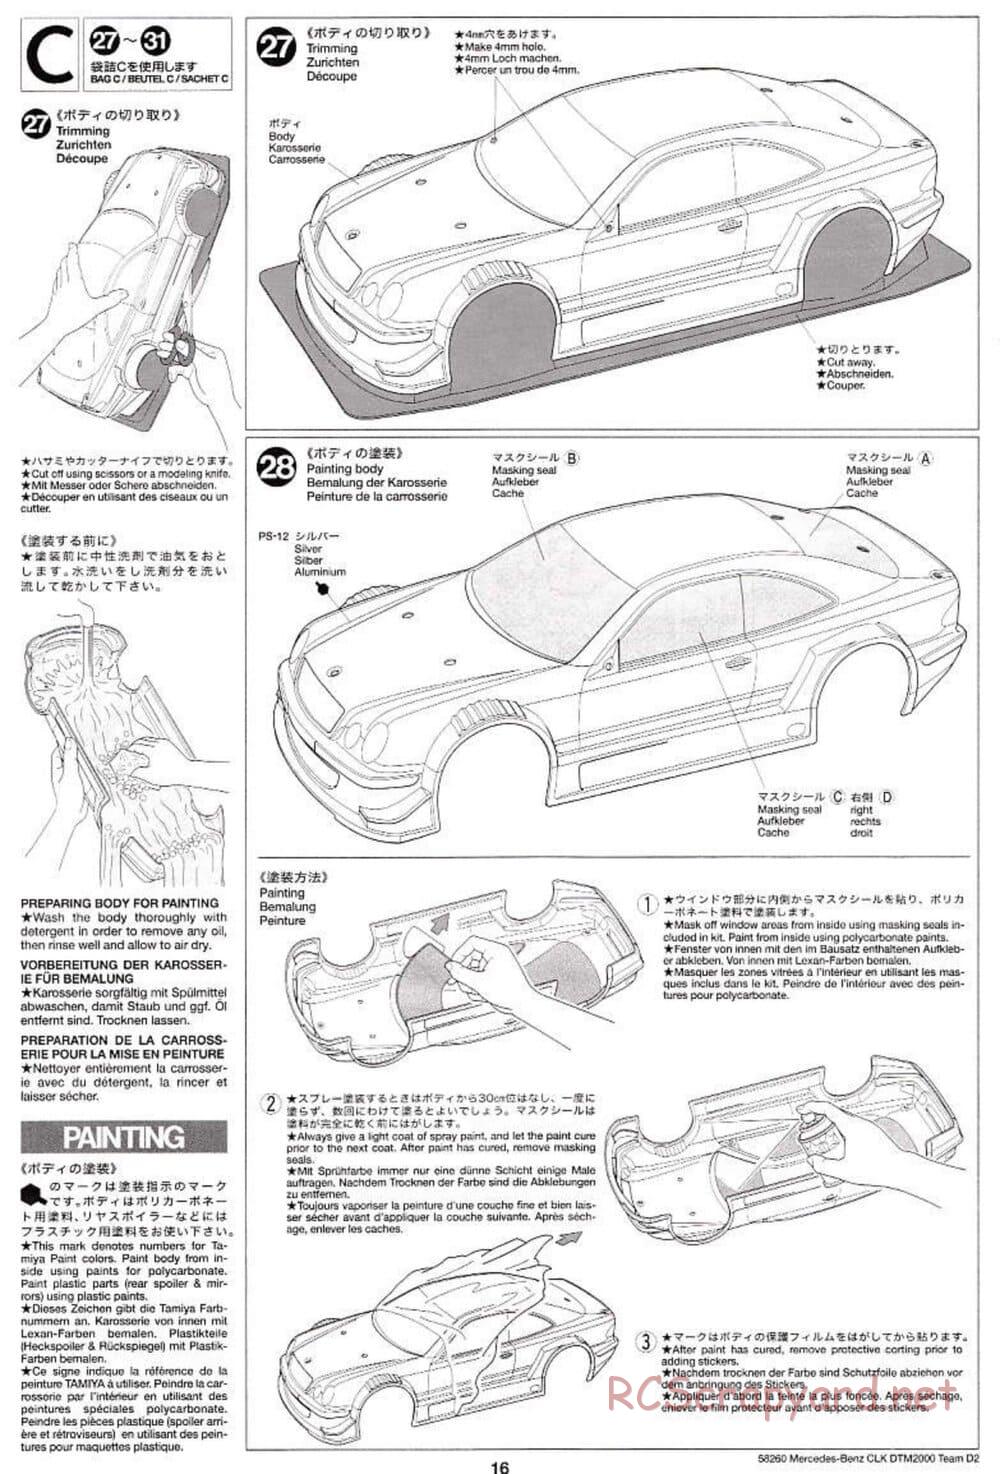 Tamiya - Mercedes Benz CLK DTM 2000 Team D2 - TL-01 Chassis - Manual - Page 16